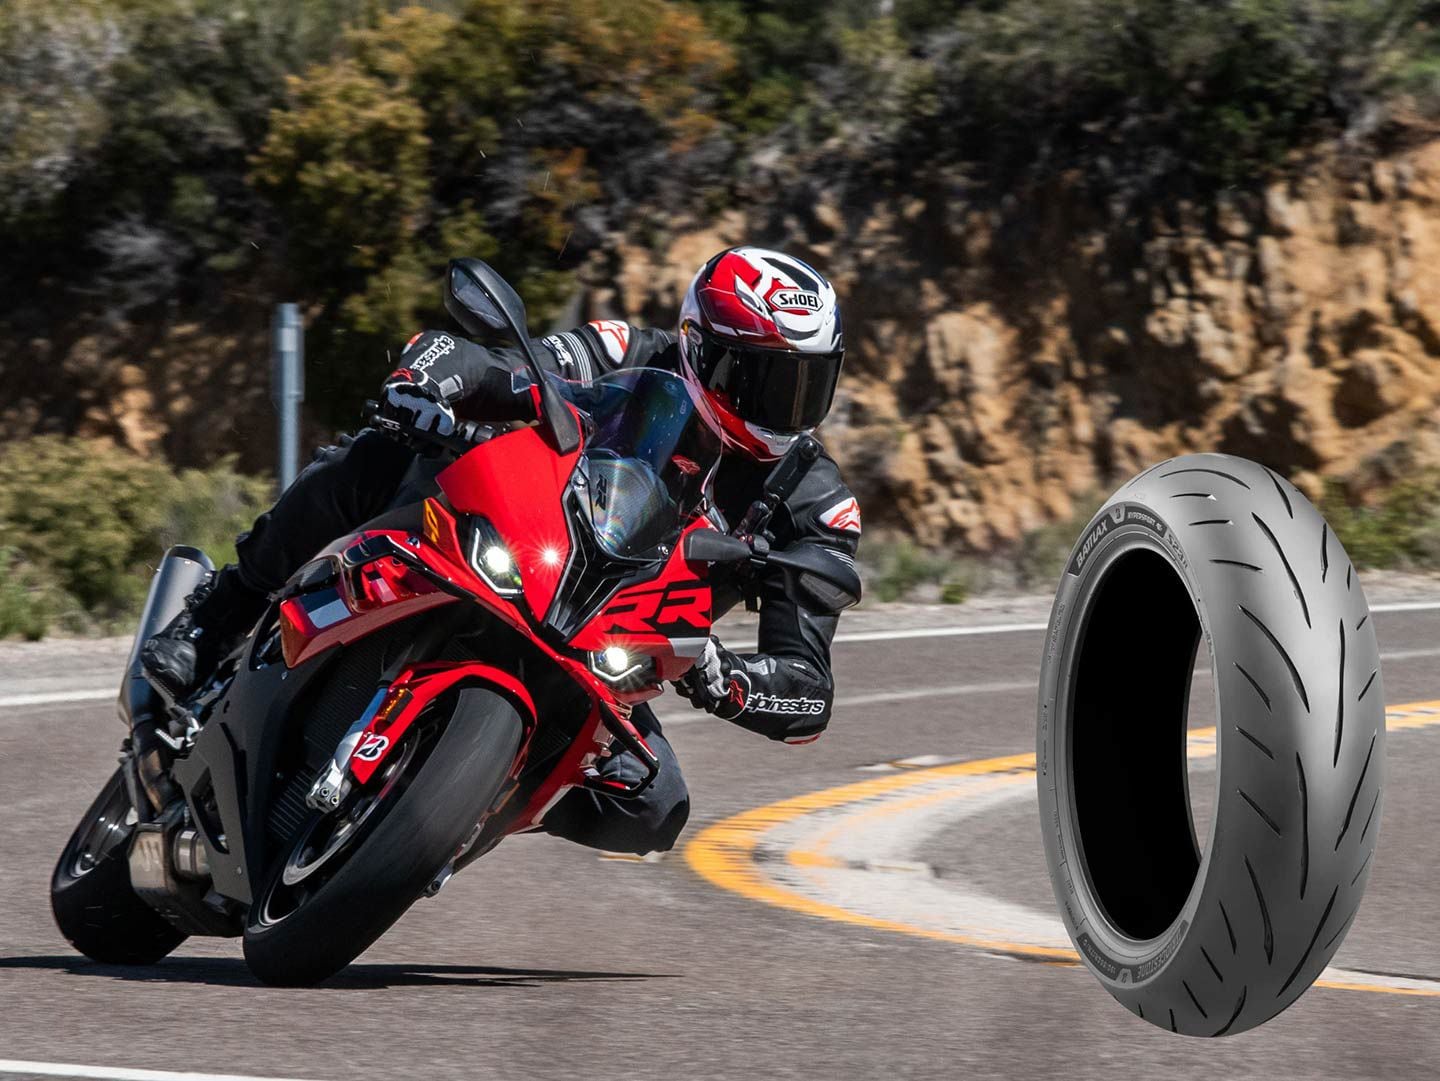 Bridgestone describes its Battlax Hypersport S23 as being “engineered for increased wet and dry grip, plus cornering stability without compromising wear for more time carving up the road.” Basically, more of everything you want as a sportbike rider.